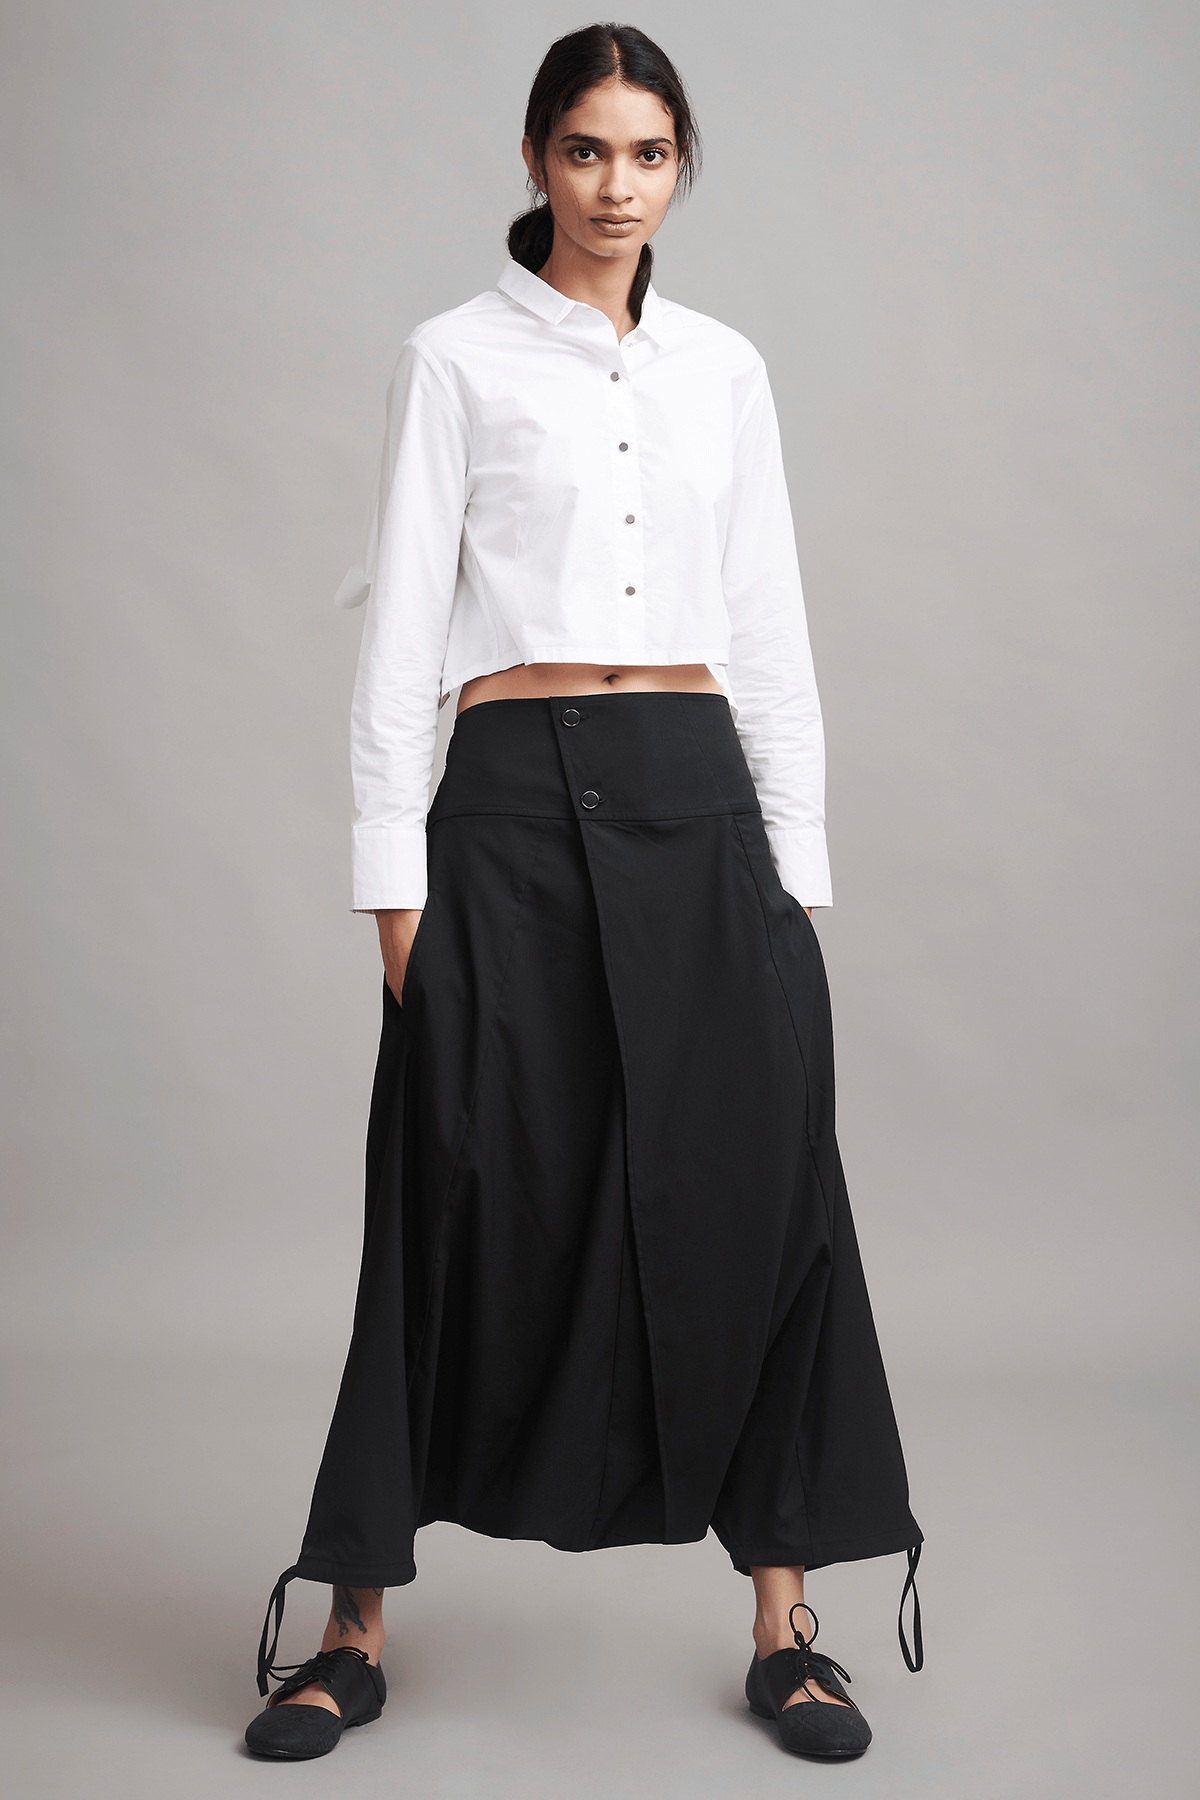 dash and dot - Front Overlap Pant Online